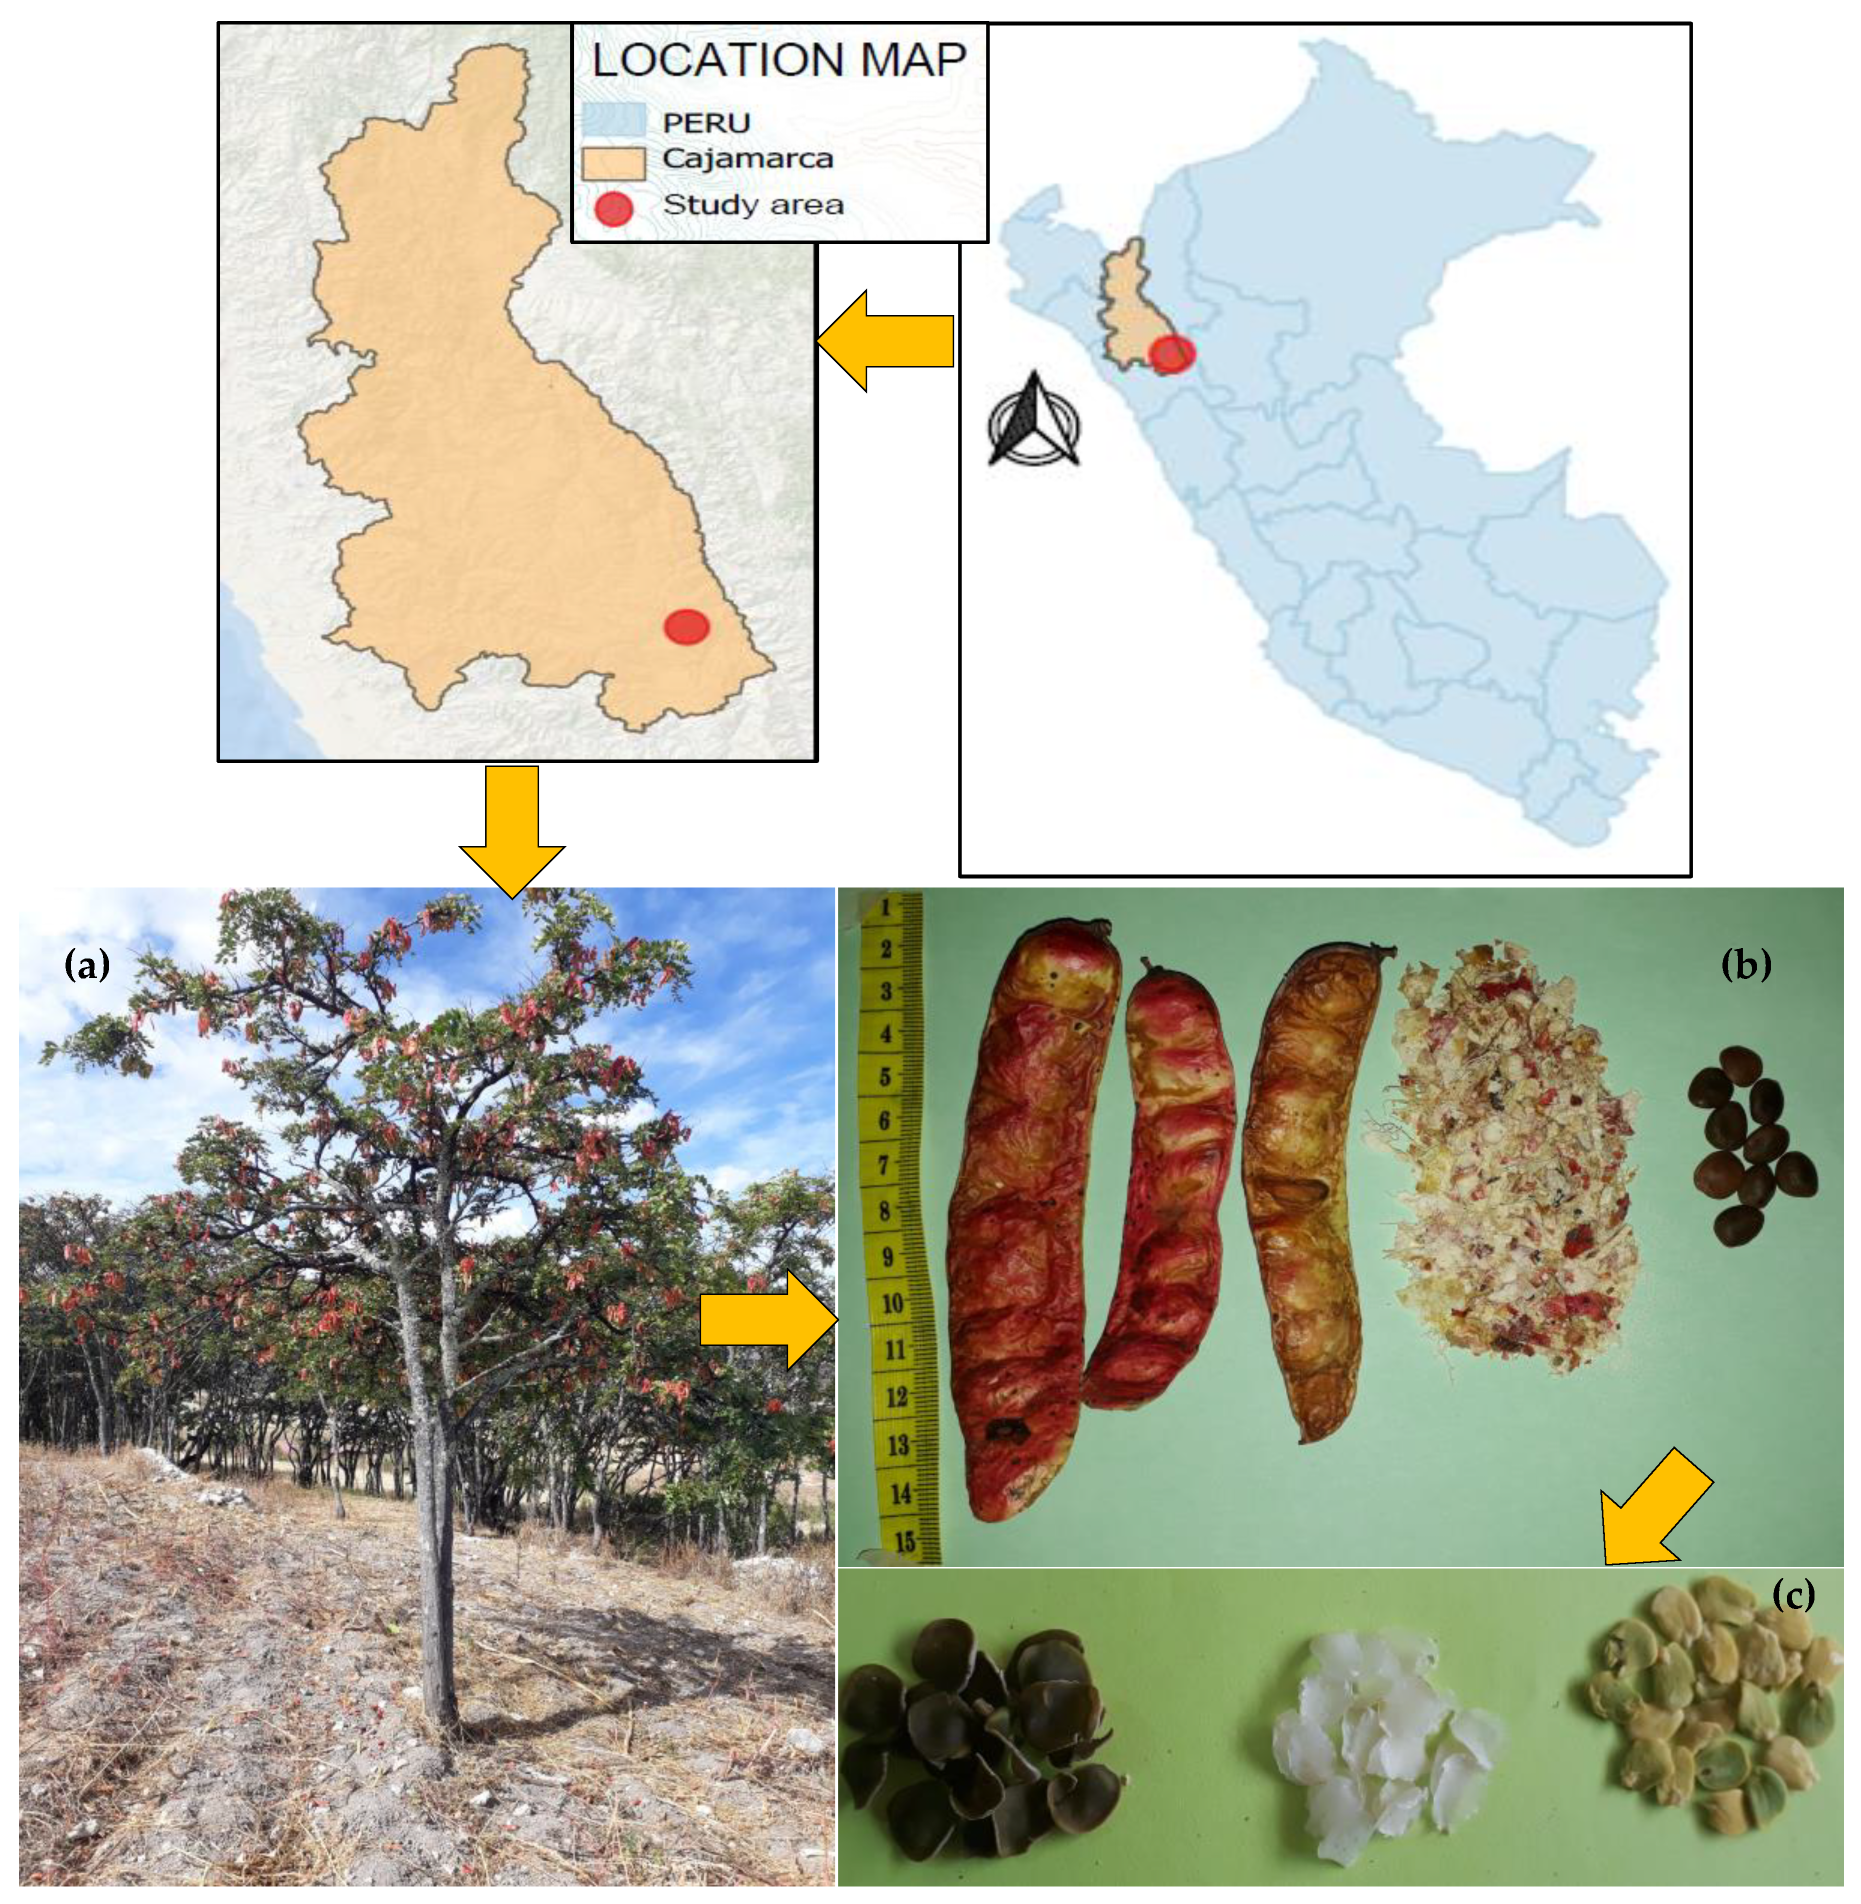 Agronomy | Free Full-Text | Increased Production of Tara (Caesalpinia  spinosa) by Edaphoclimatic Variation in the Altitudinal Gradient of the  Peruvian Andes